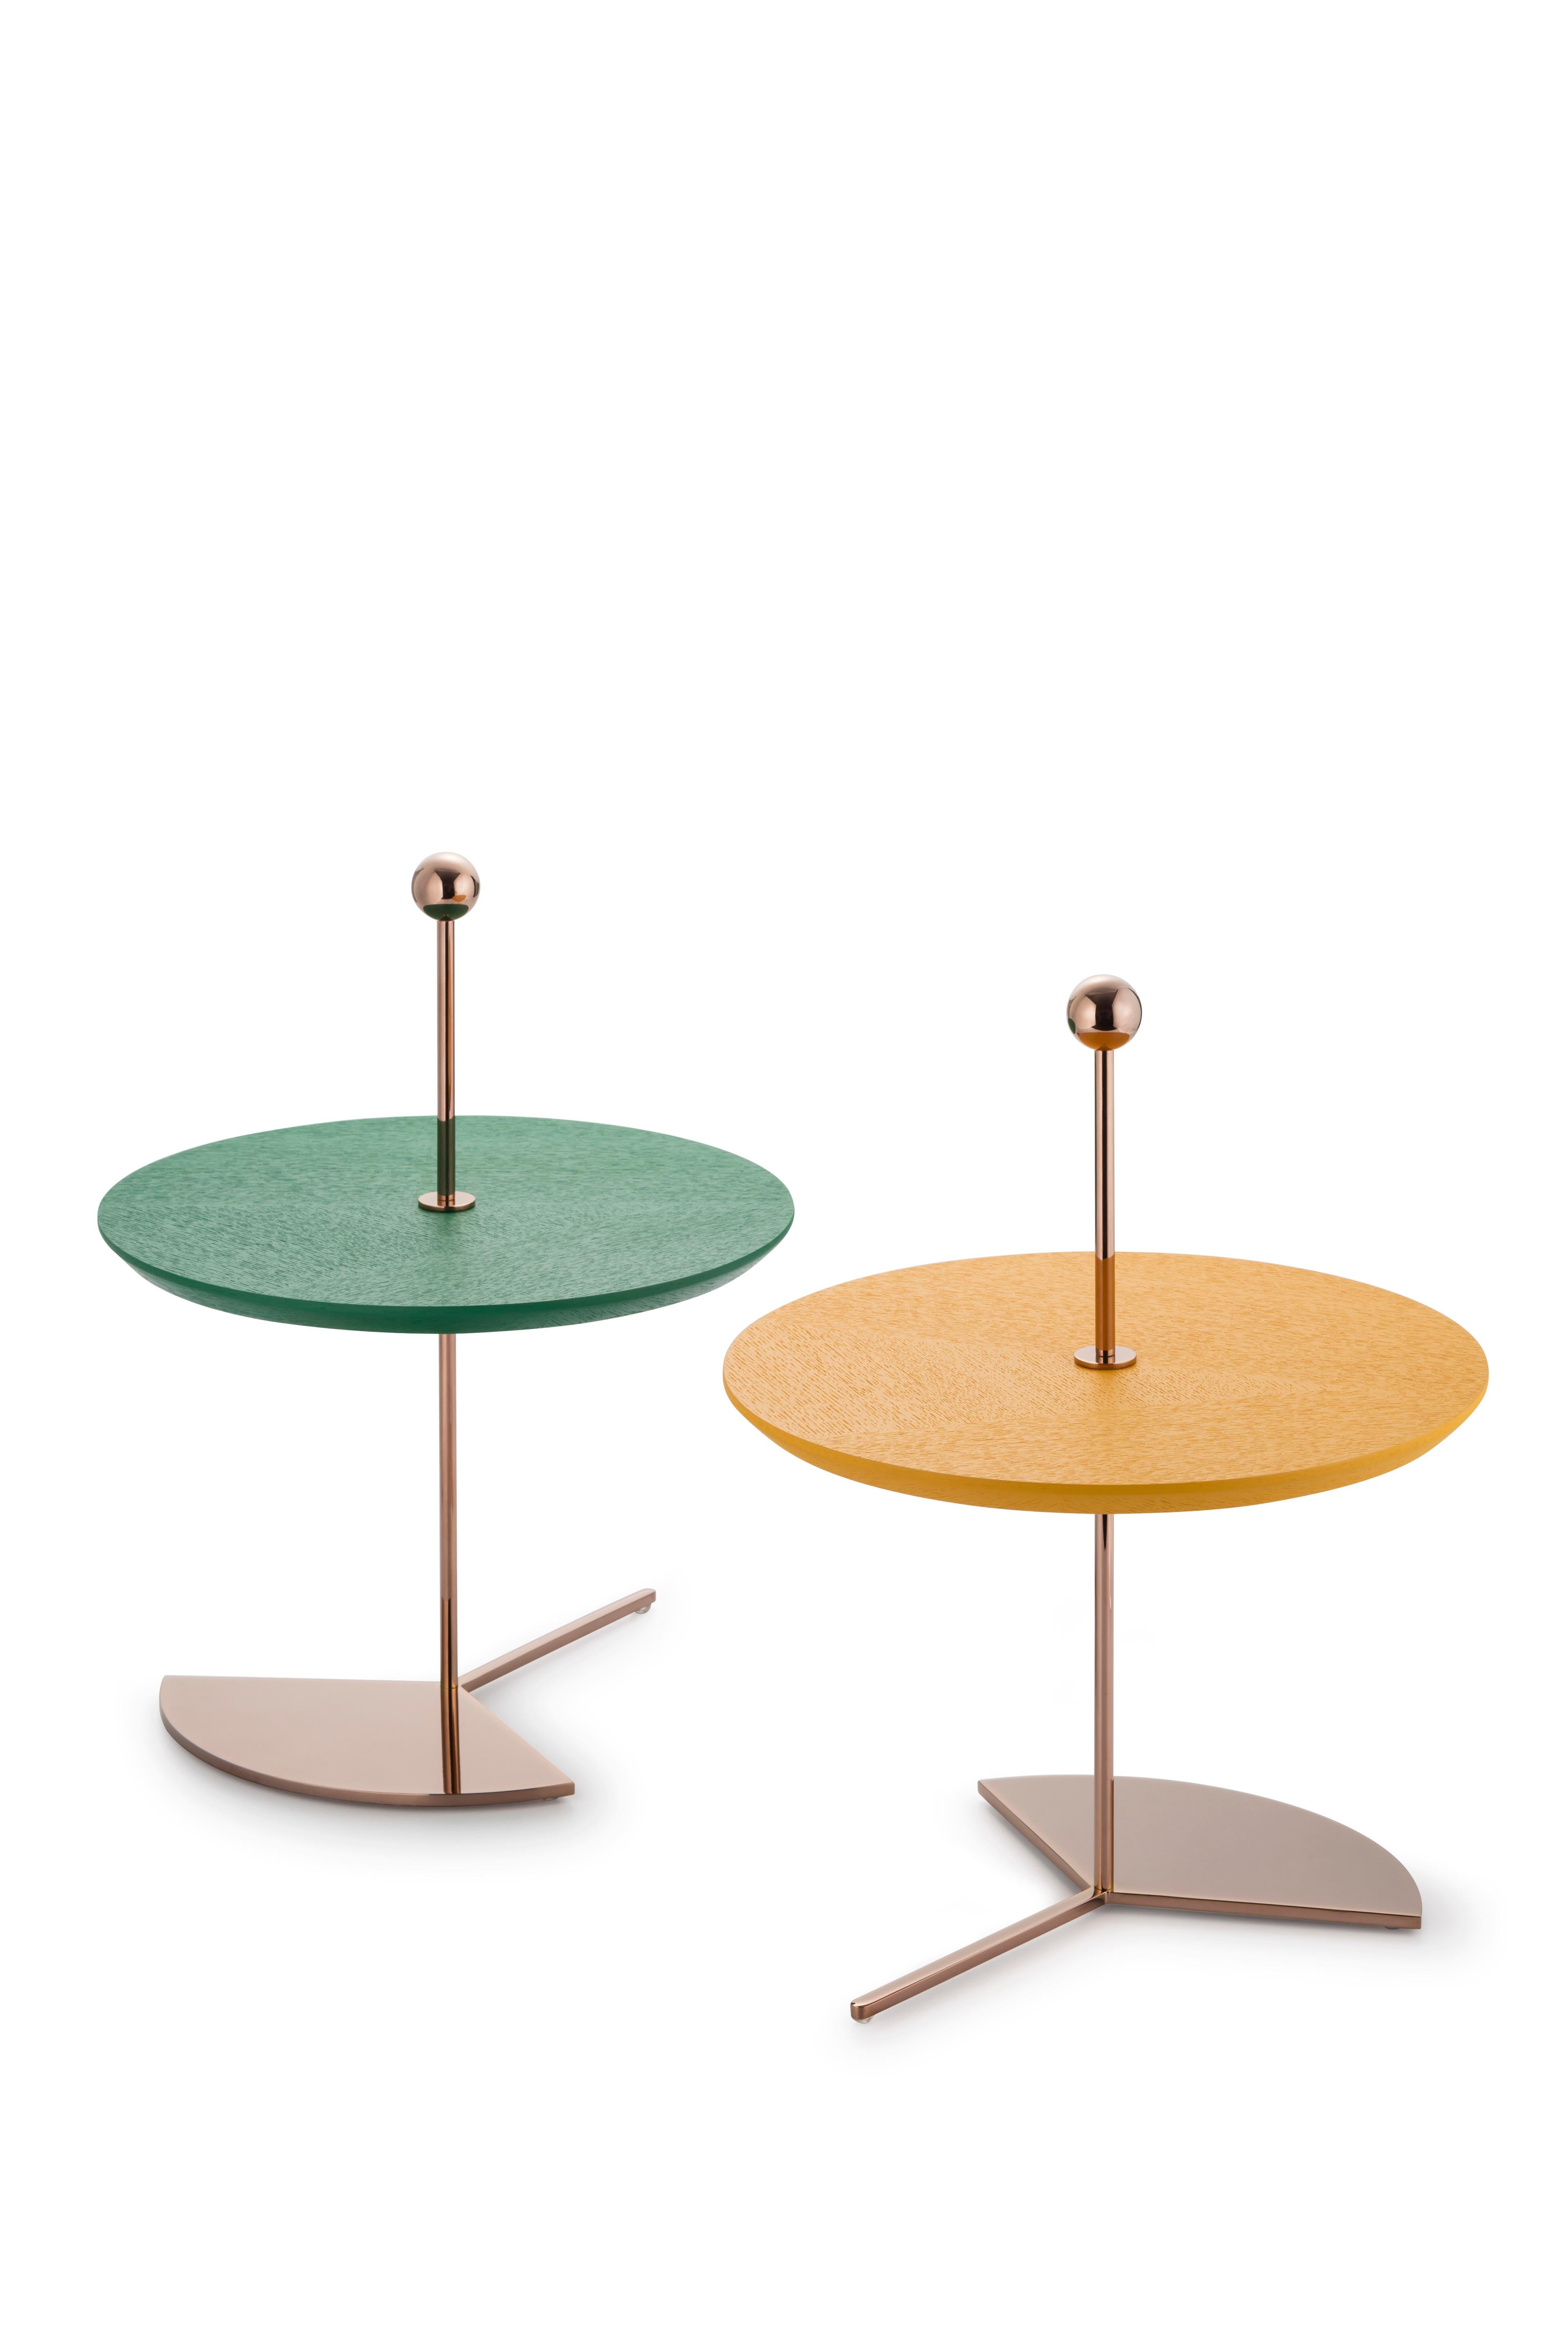 French Contemporary Cake Stand For Sale